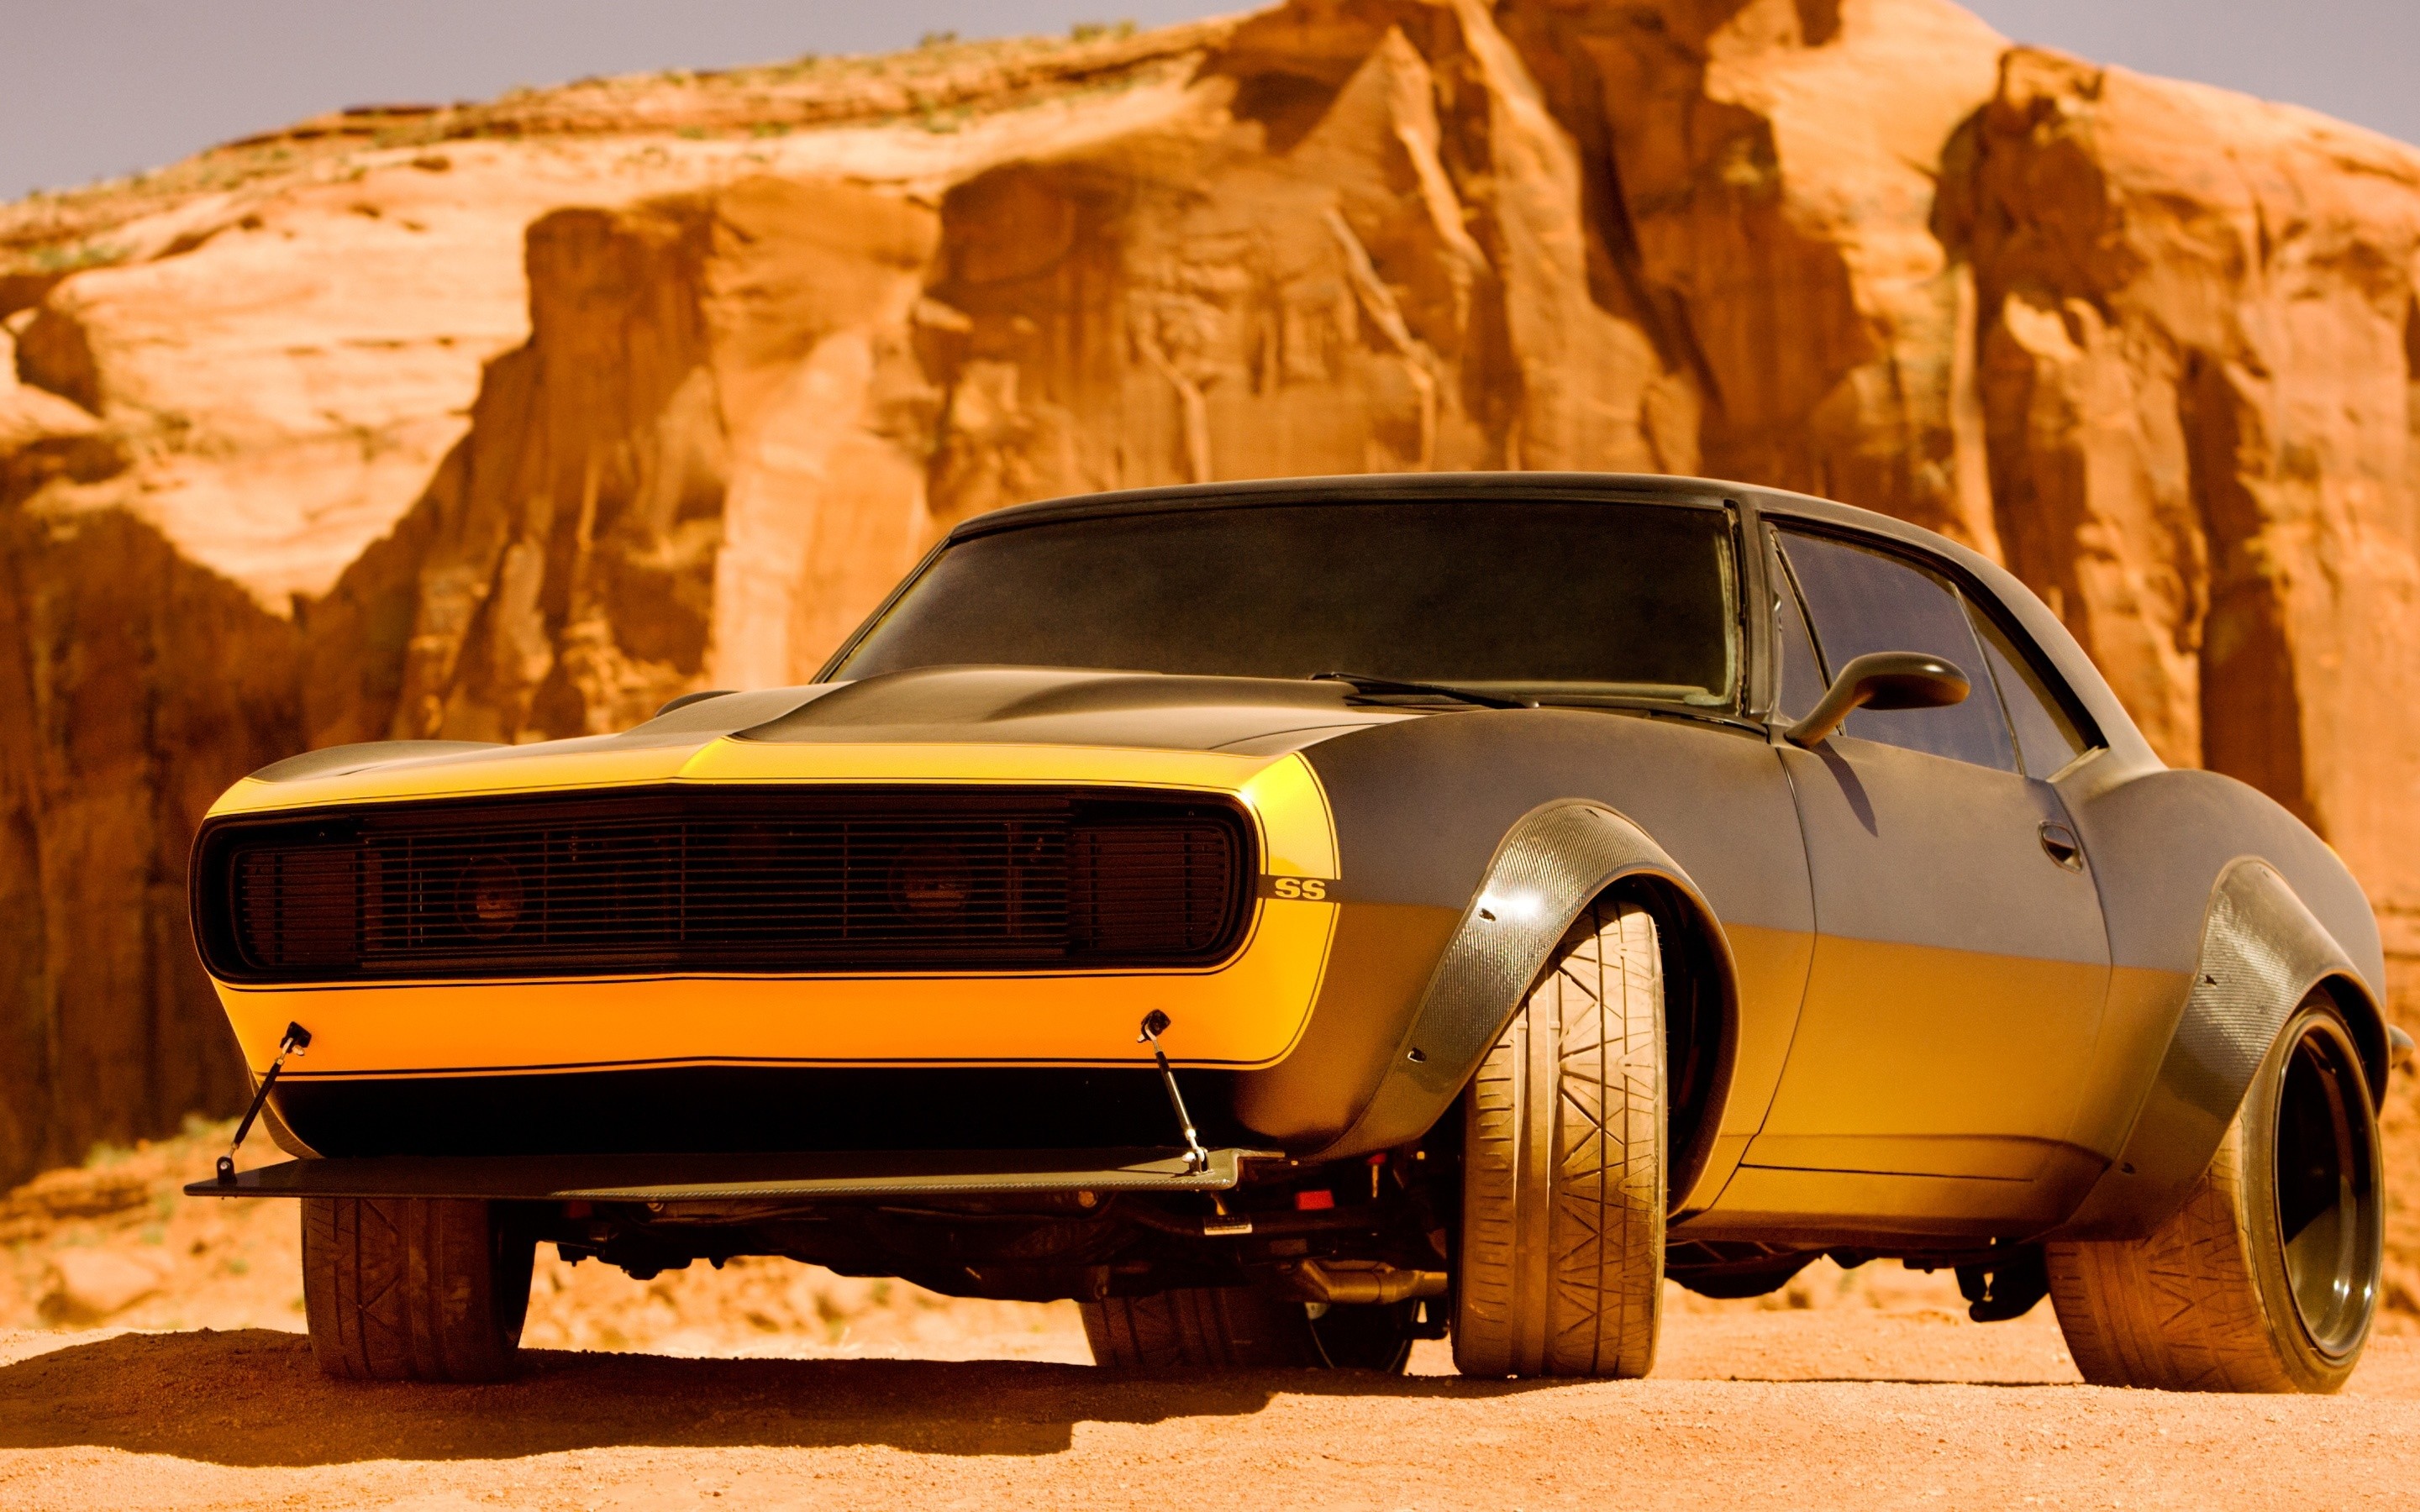 2880x1800 American Muscle Car Wallpapers - Wallpaper Cave ...